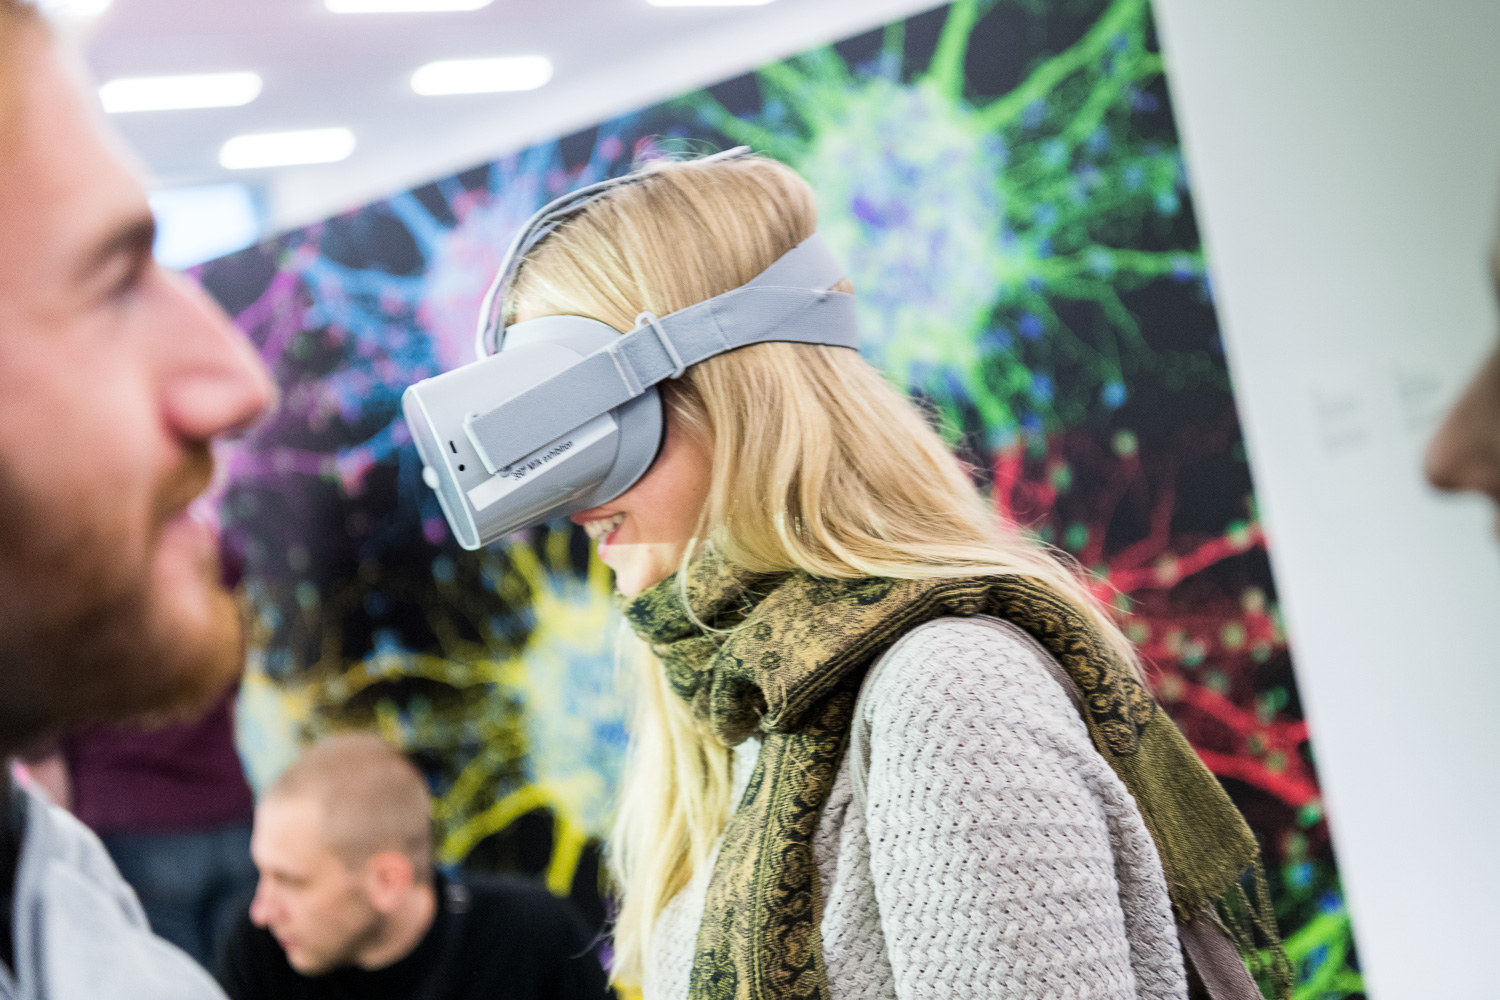 Travel around the globe with virtual reality goggles: The Ethnographic Museum of the University of Zurich is staging several virtual exhibitions at the science festival. (Image: Frank Brüderli)